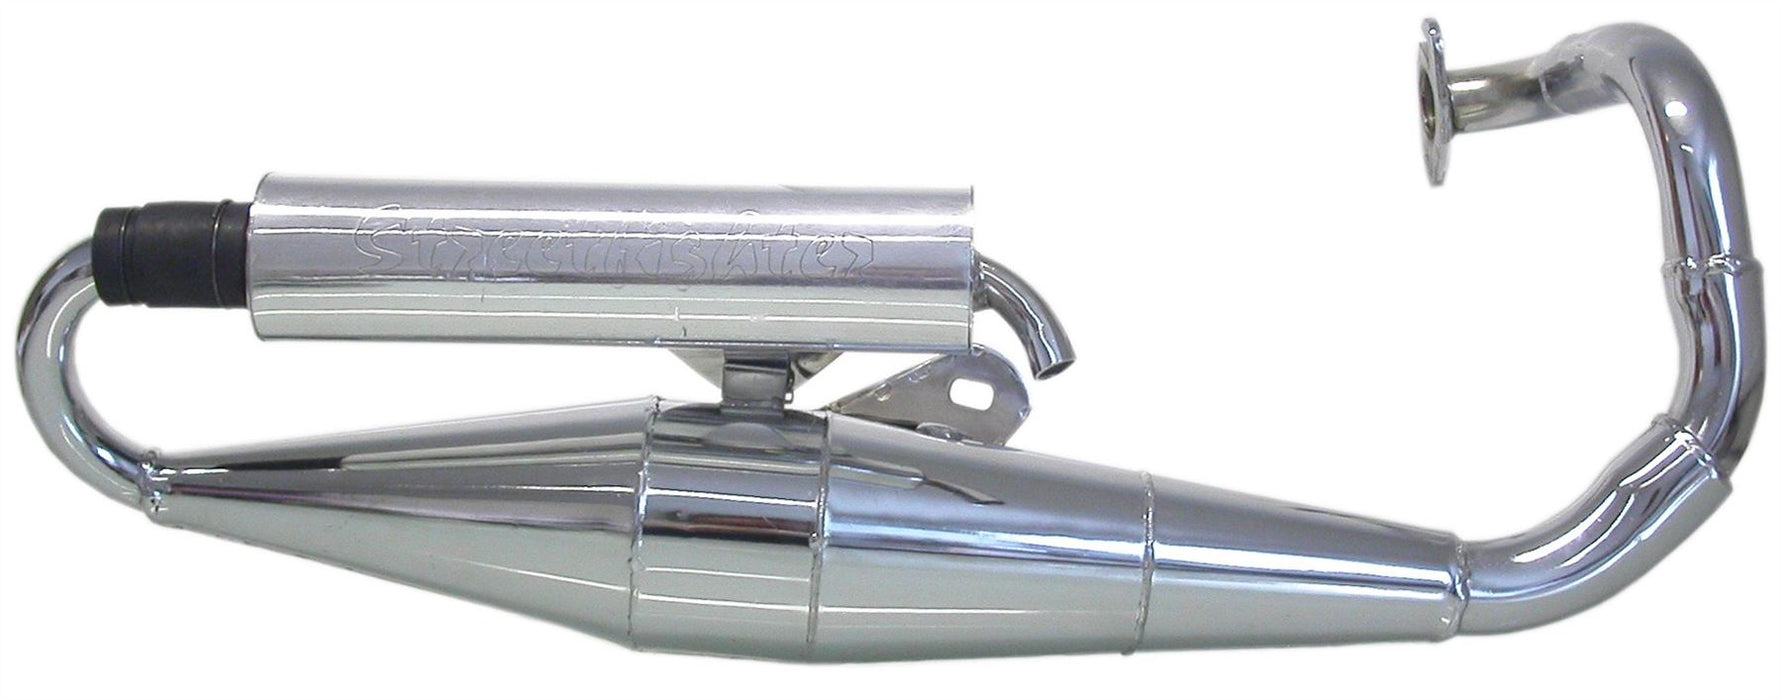 Motorcycle Sports Exhaust Fits Peugeot Zenith M (50cc) 1997